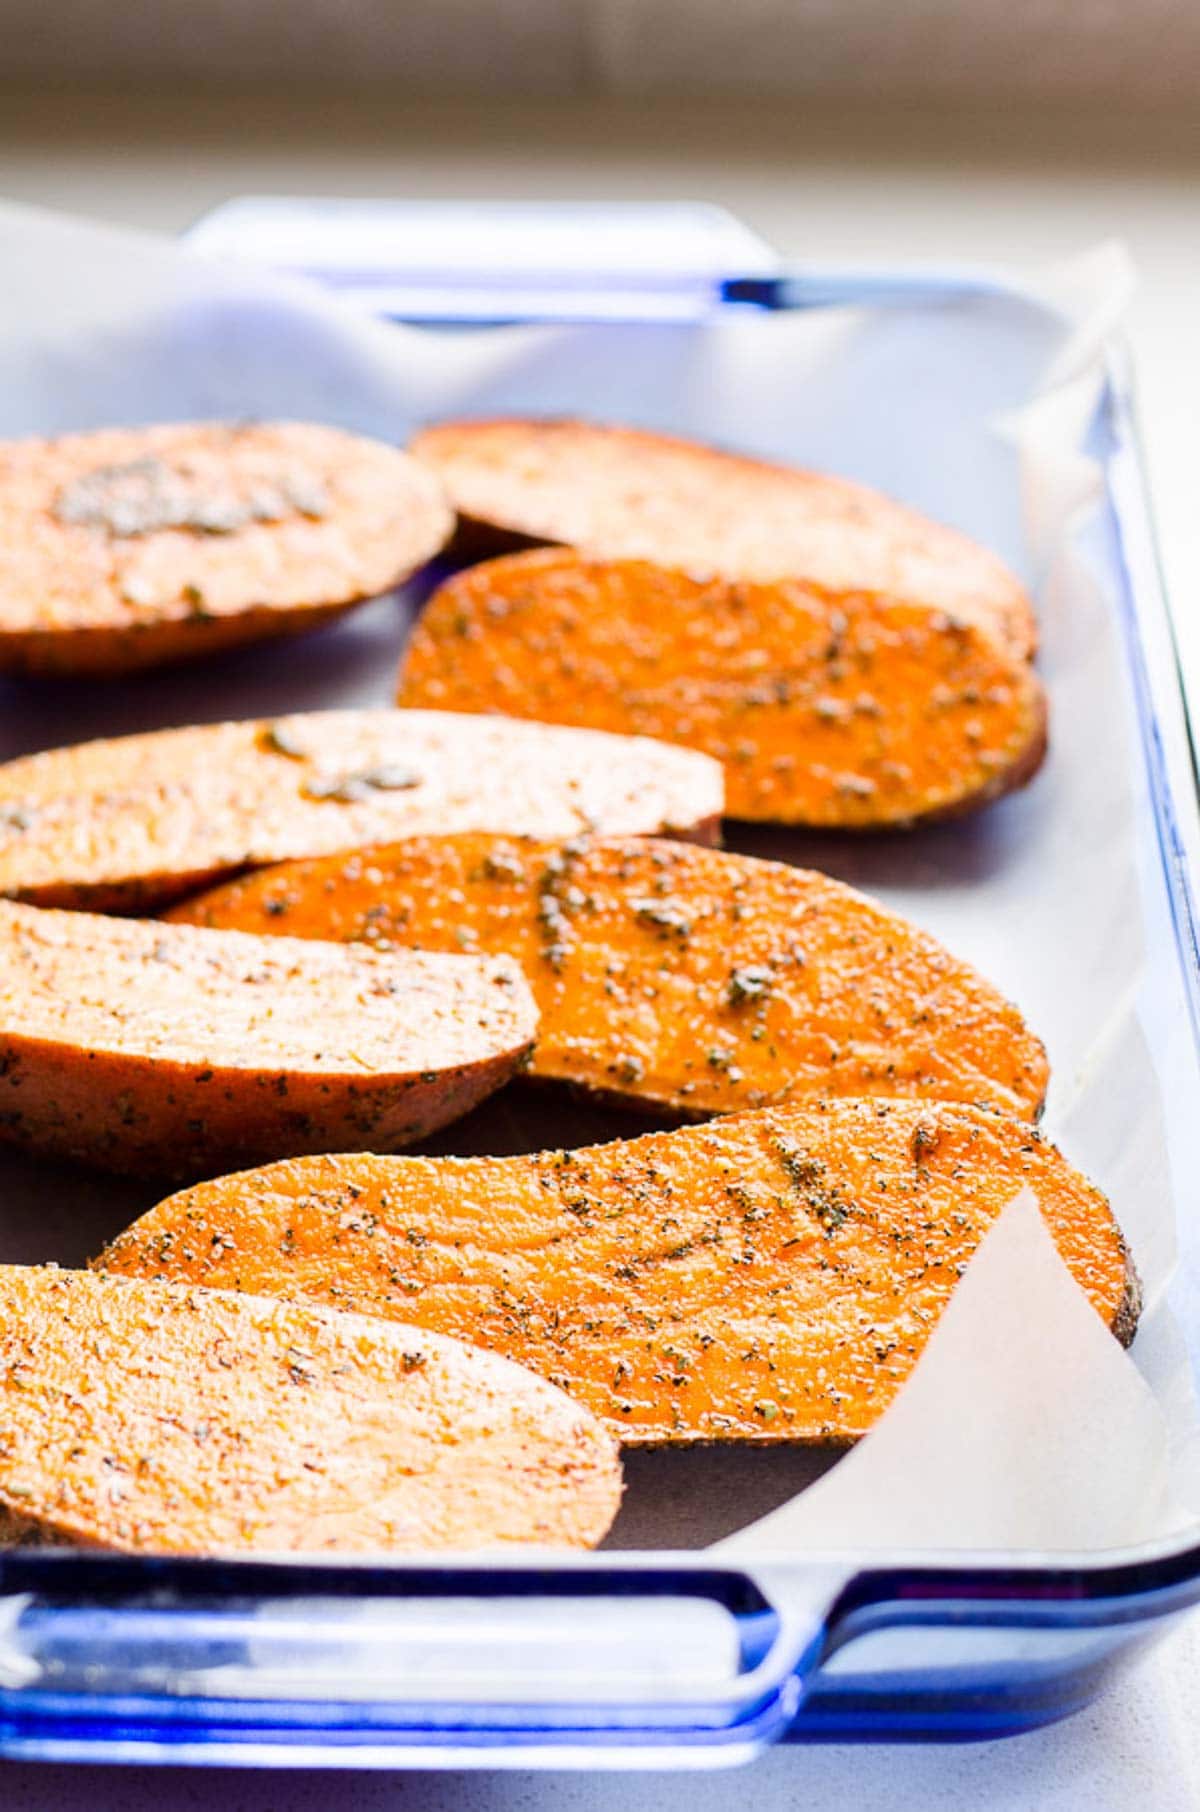 Sweet potatoes in baking dish lined with parchment paper.